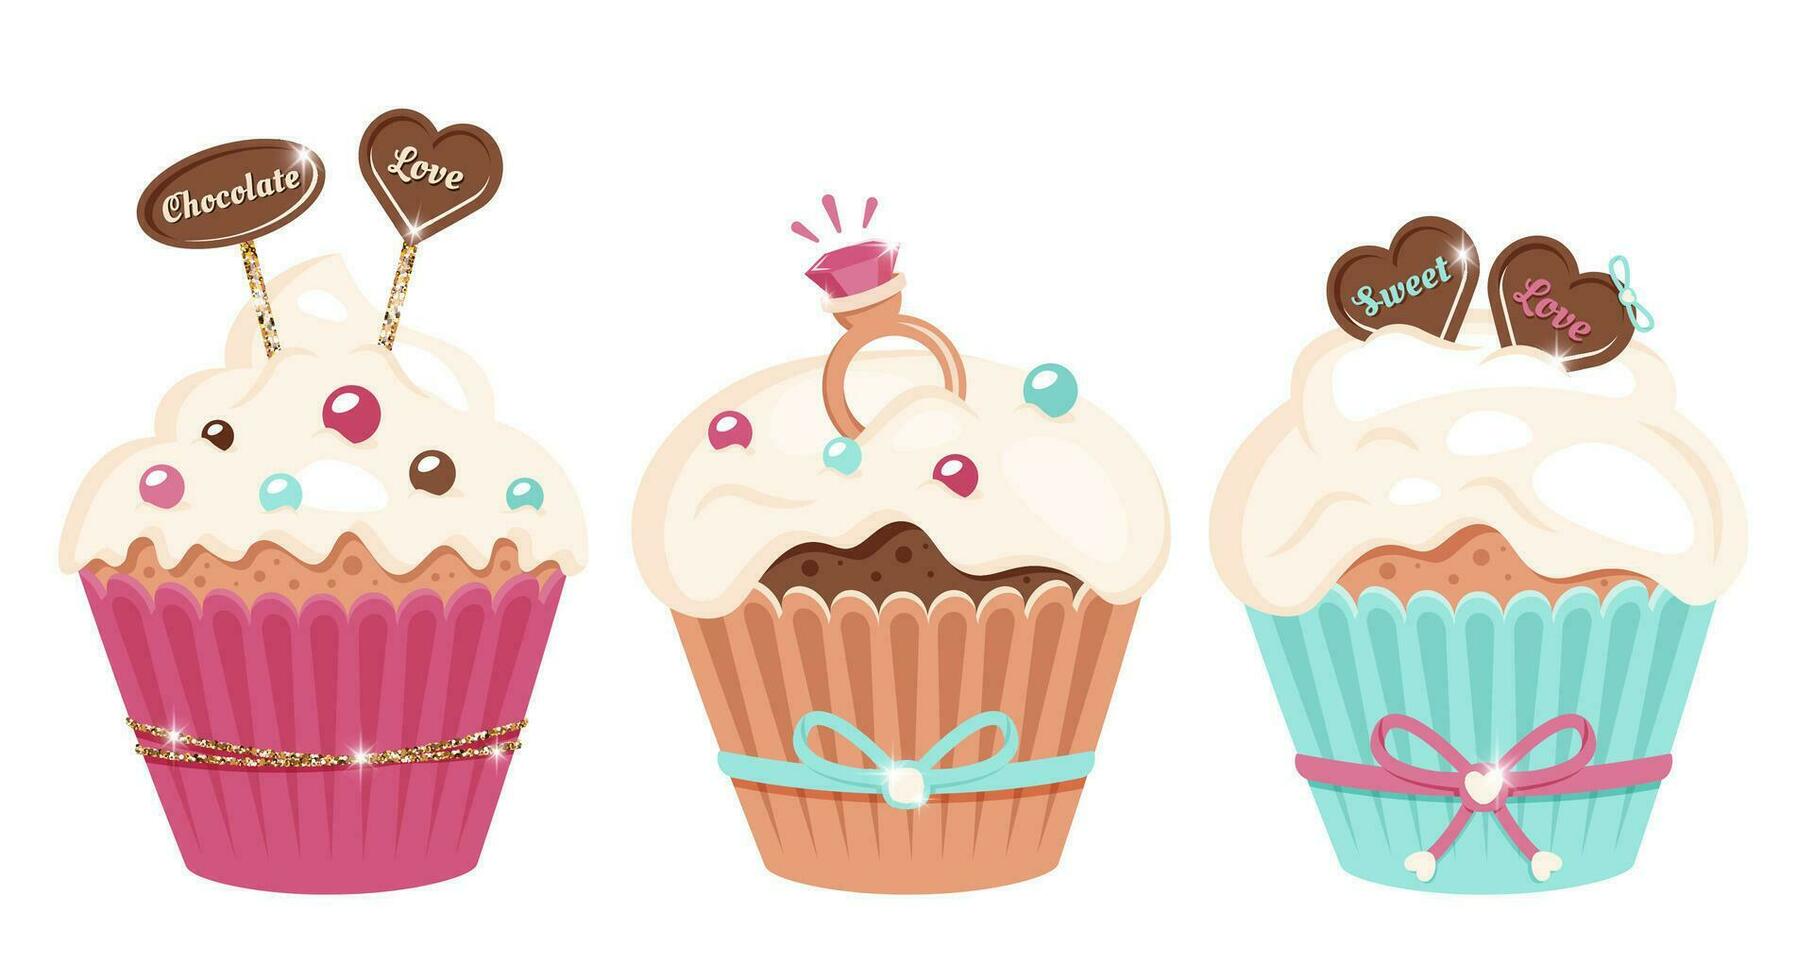 Set of festive Tasty cupcakes with various frosting in color paper cups. Sweet muffins with heart shaped chocolates, wedding ring, butter cream, sprinkling. Concept of love and engagement. Vector